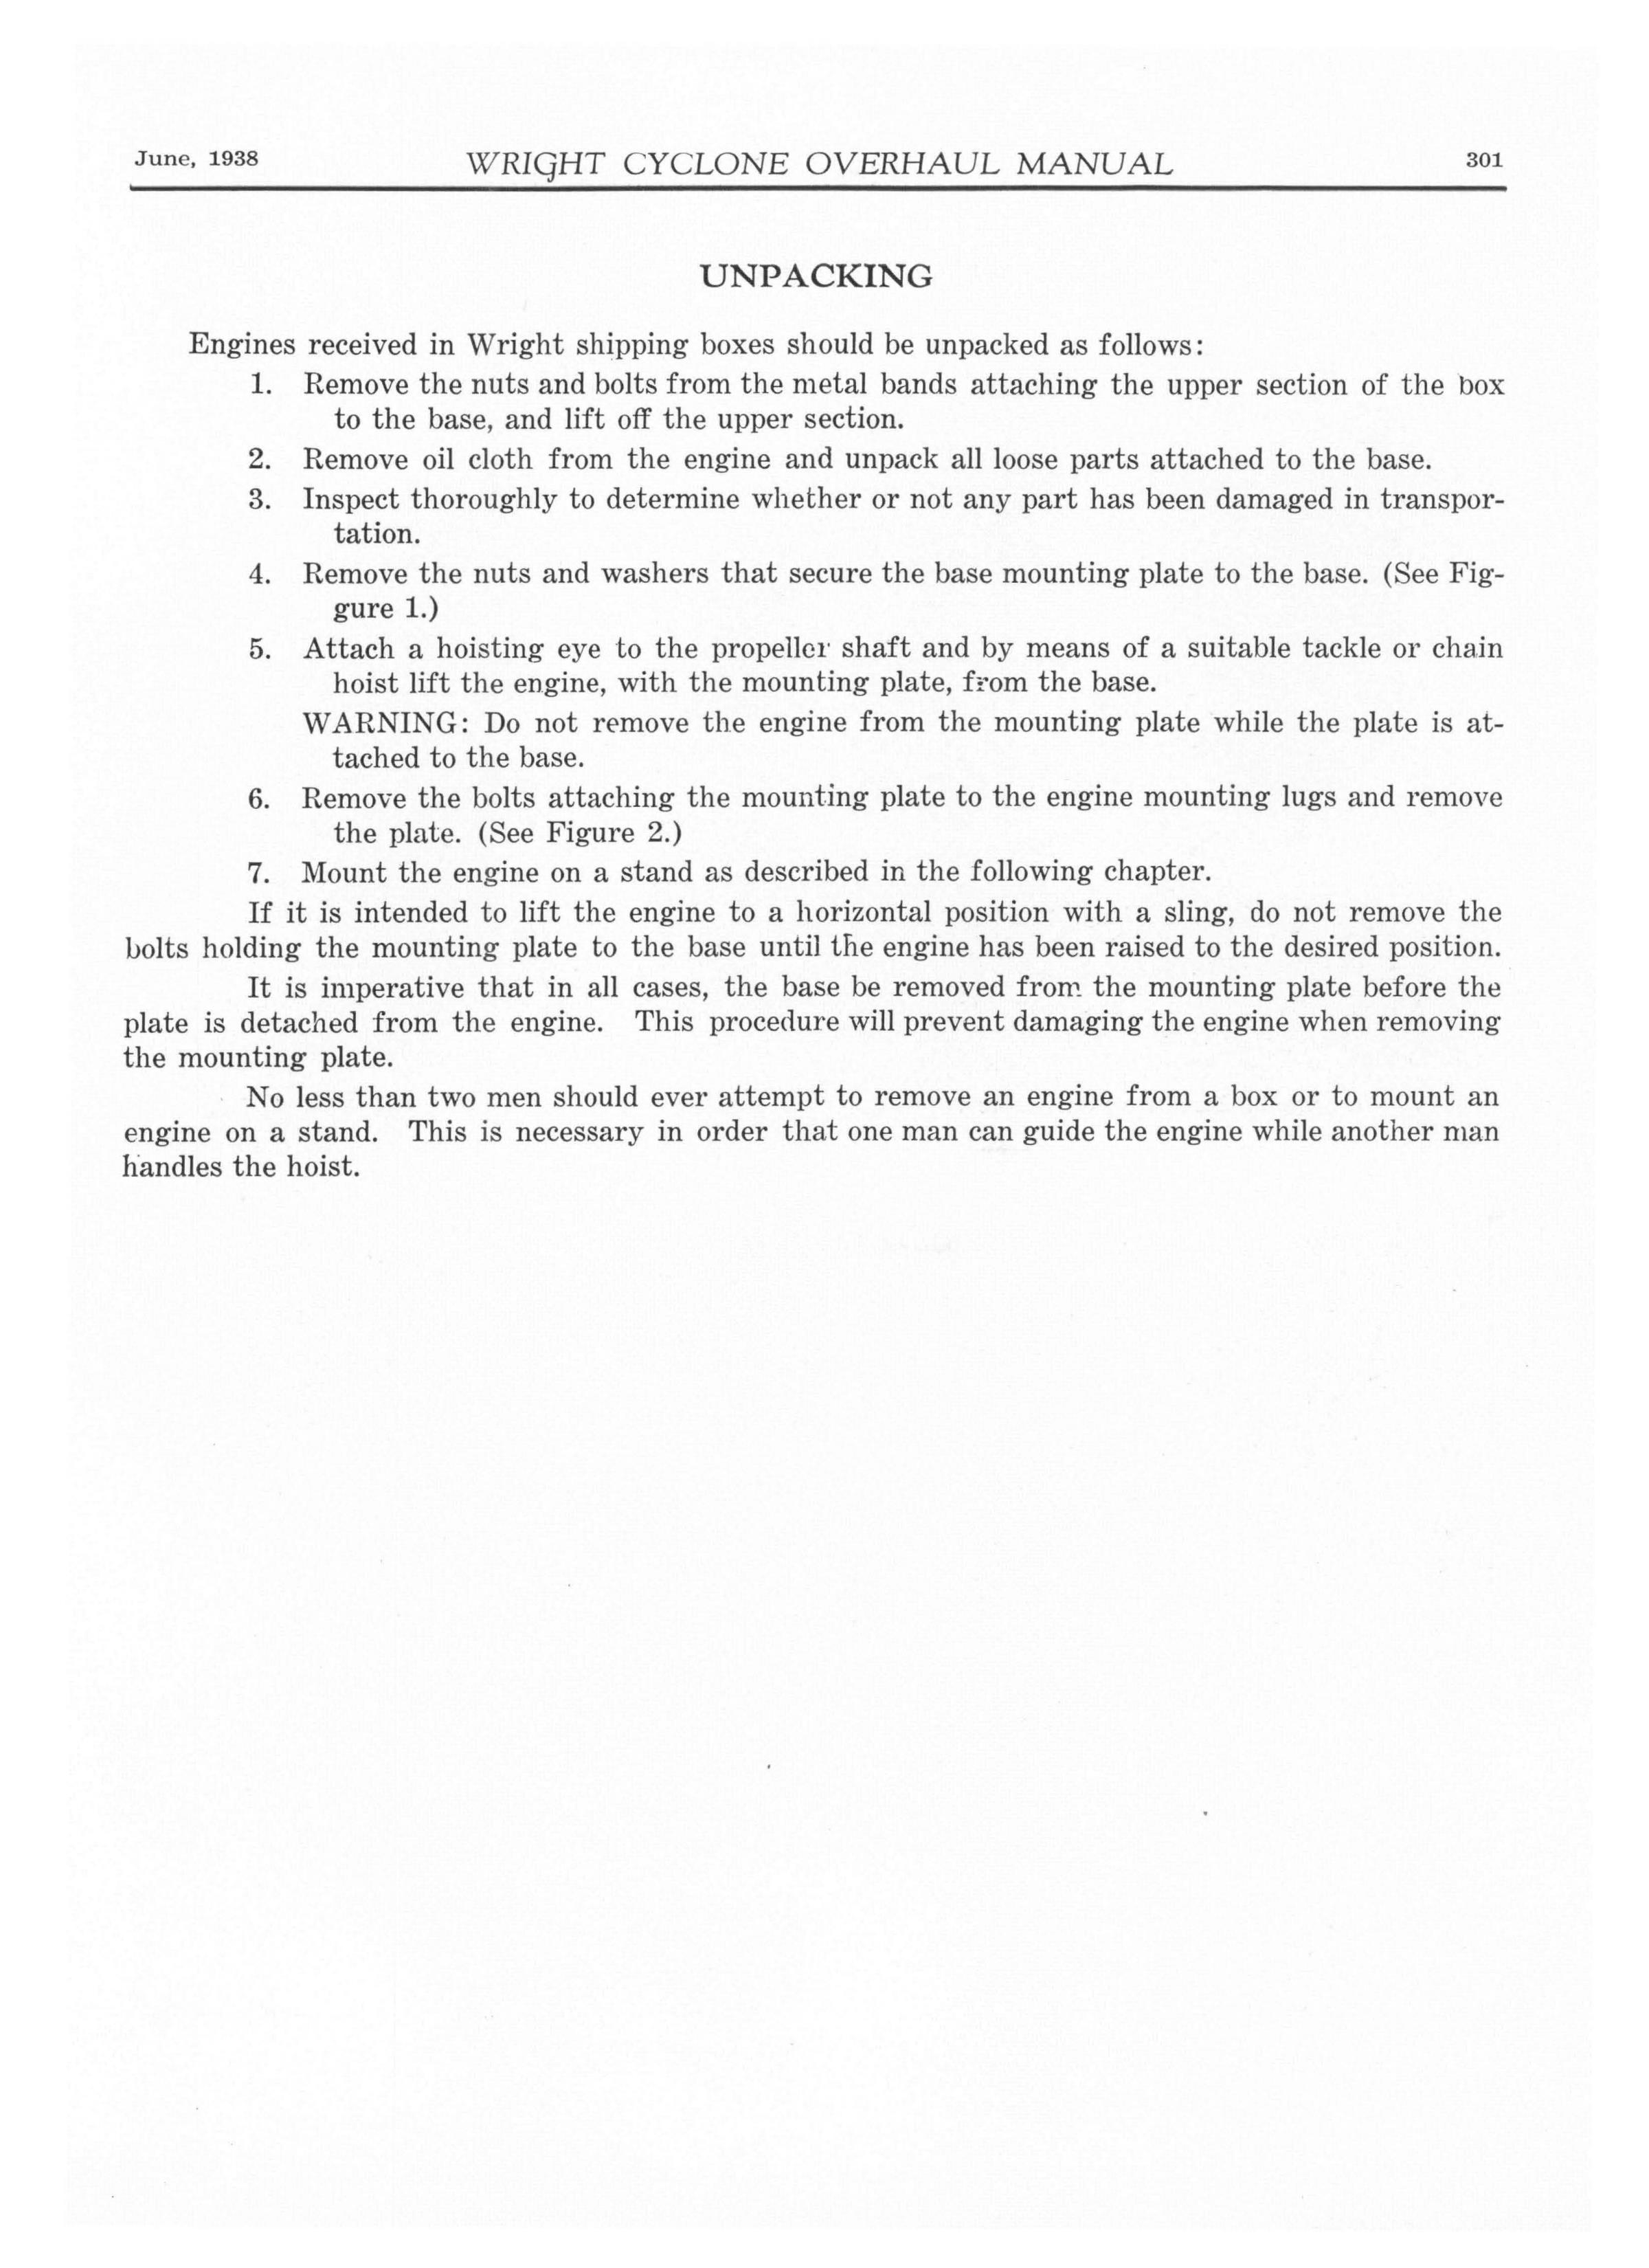 Sample page 23 from AirCorps Library document: Overhaul Manual for Wright Cyclone Engine Direct and Geared Drives